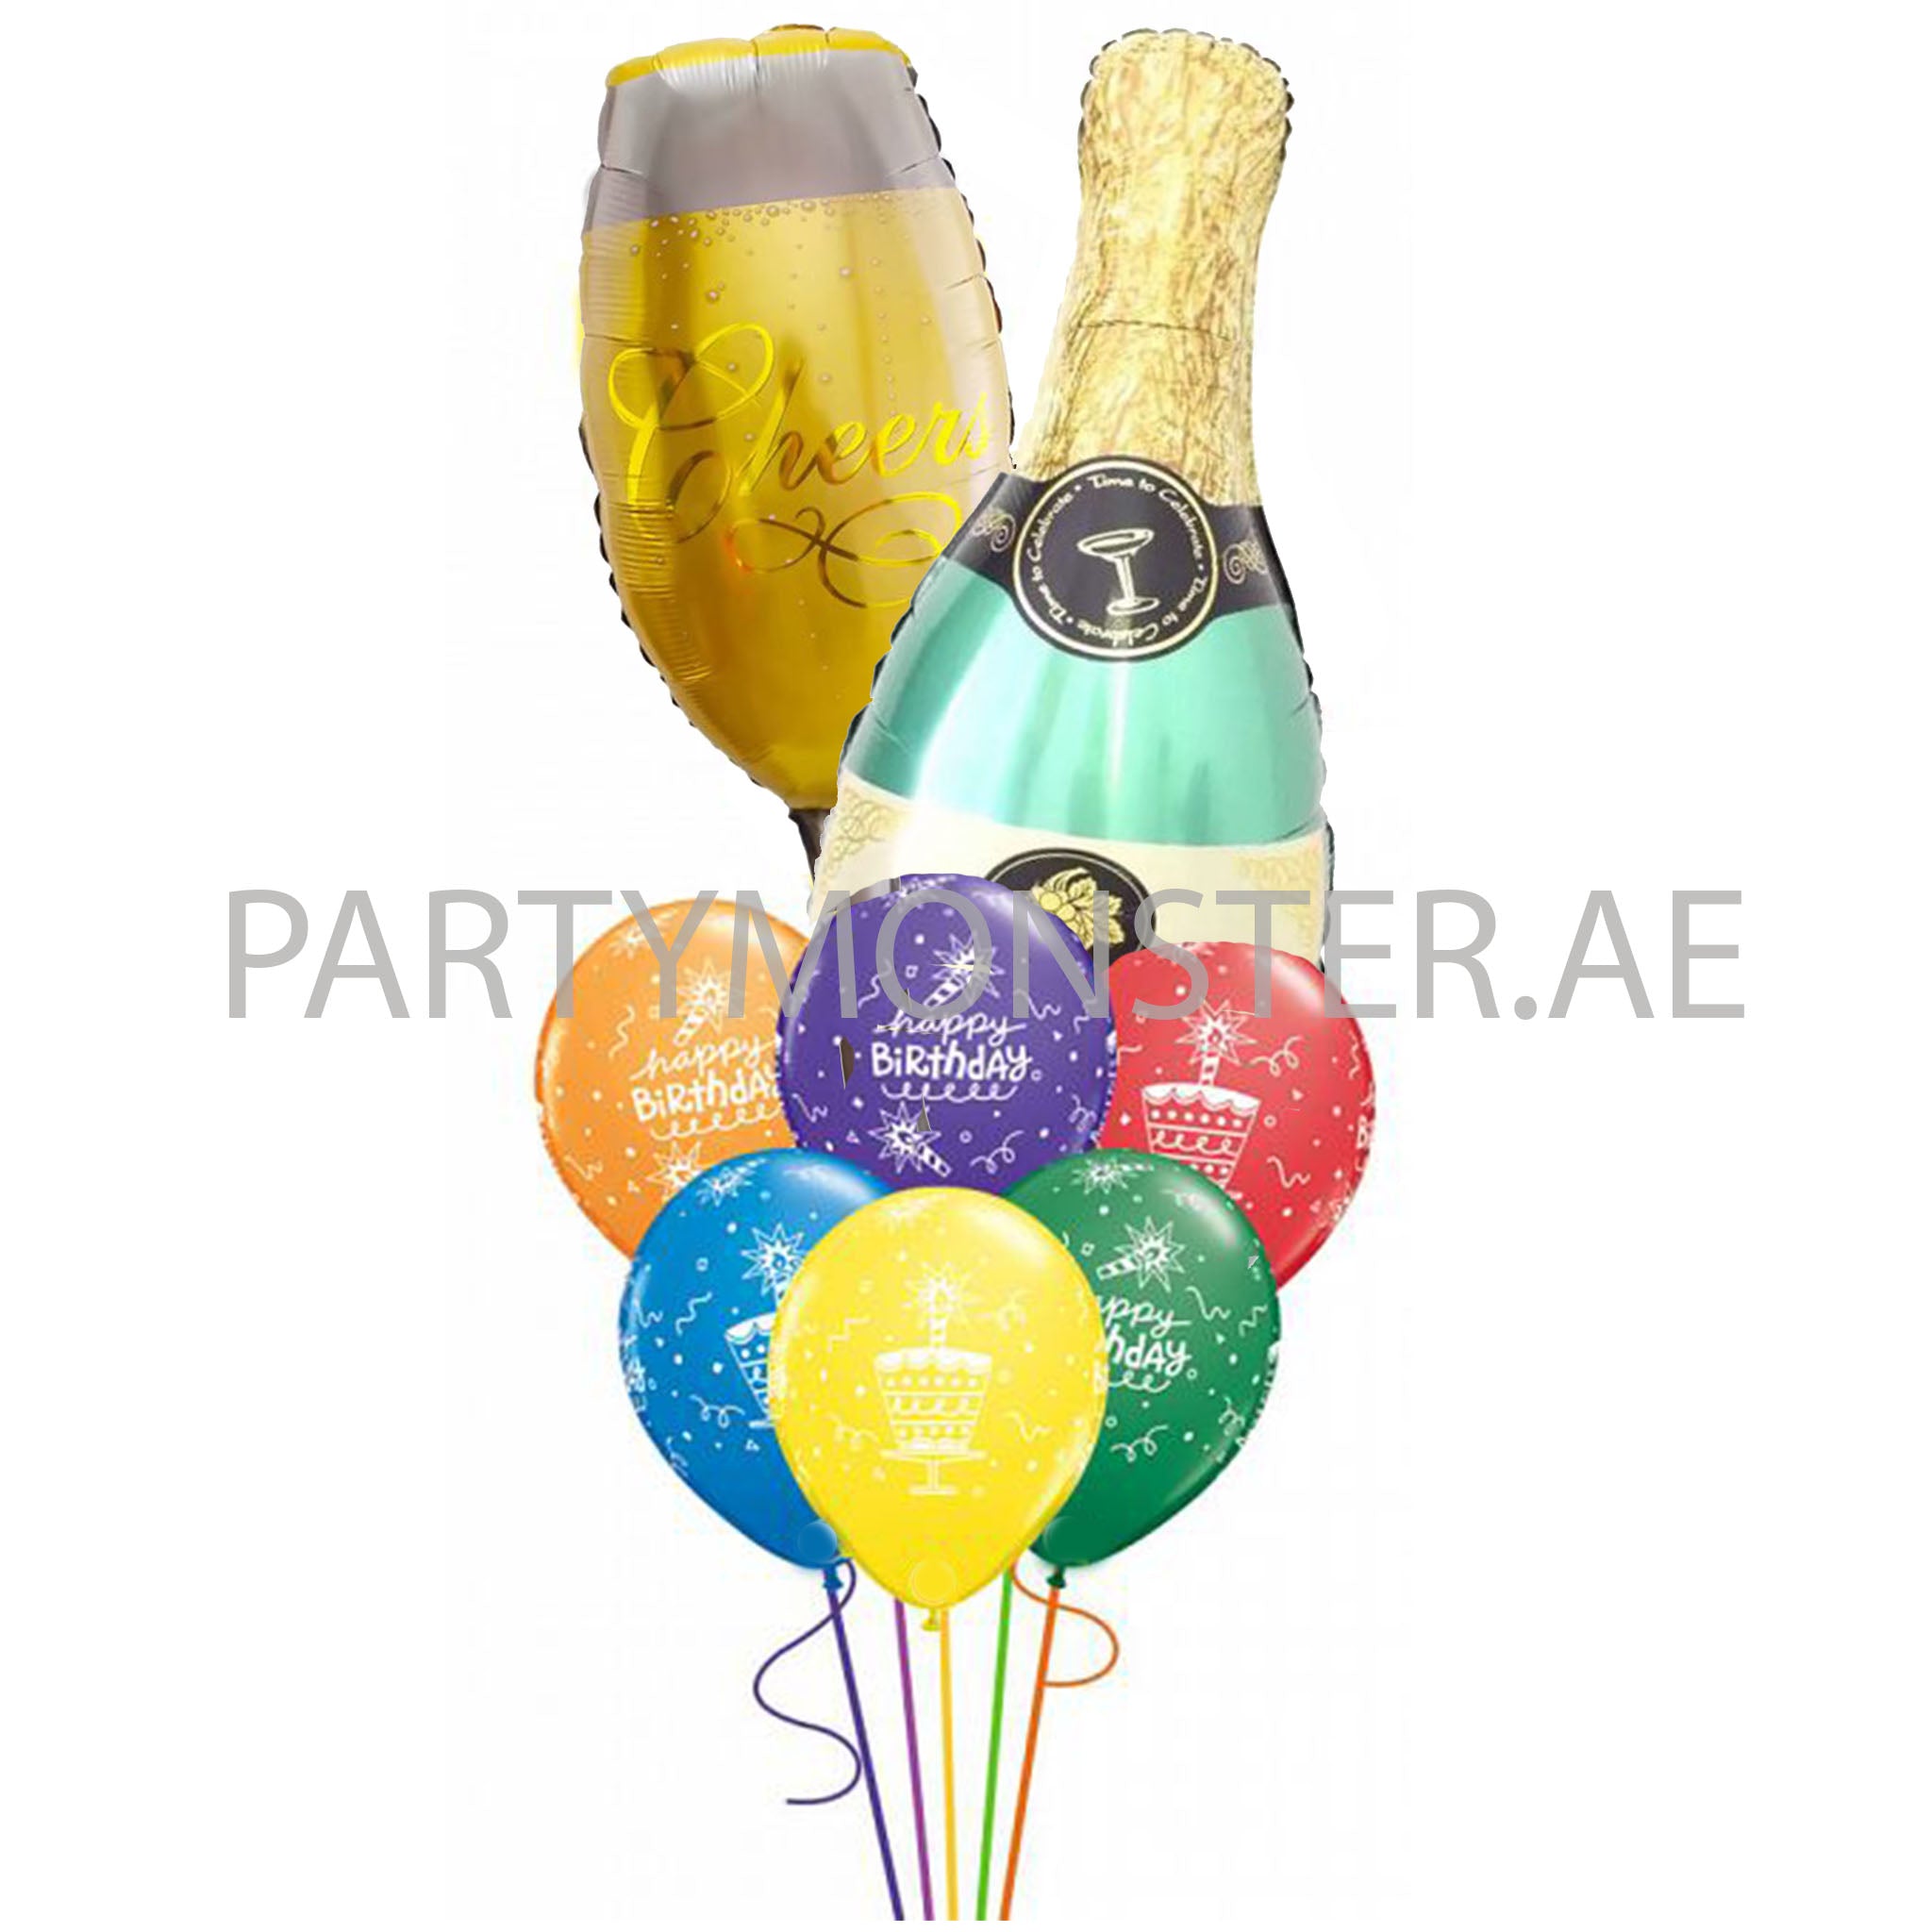 Adult's colorful birthday foil and latex balloons bouquet - PartyMonster.ae